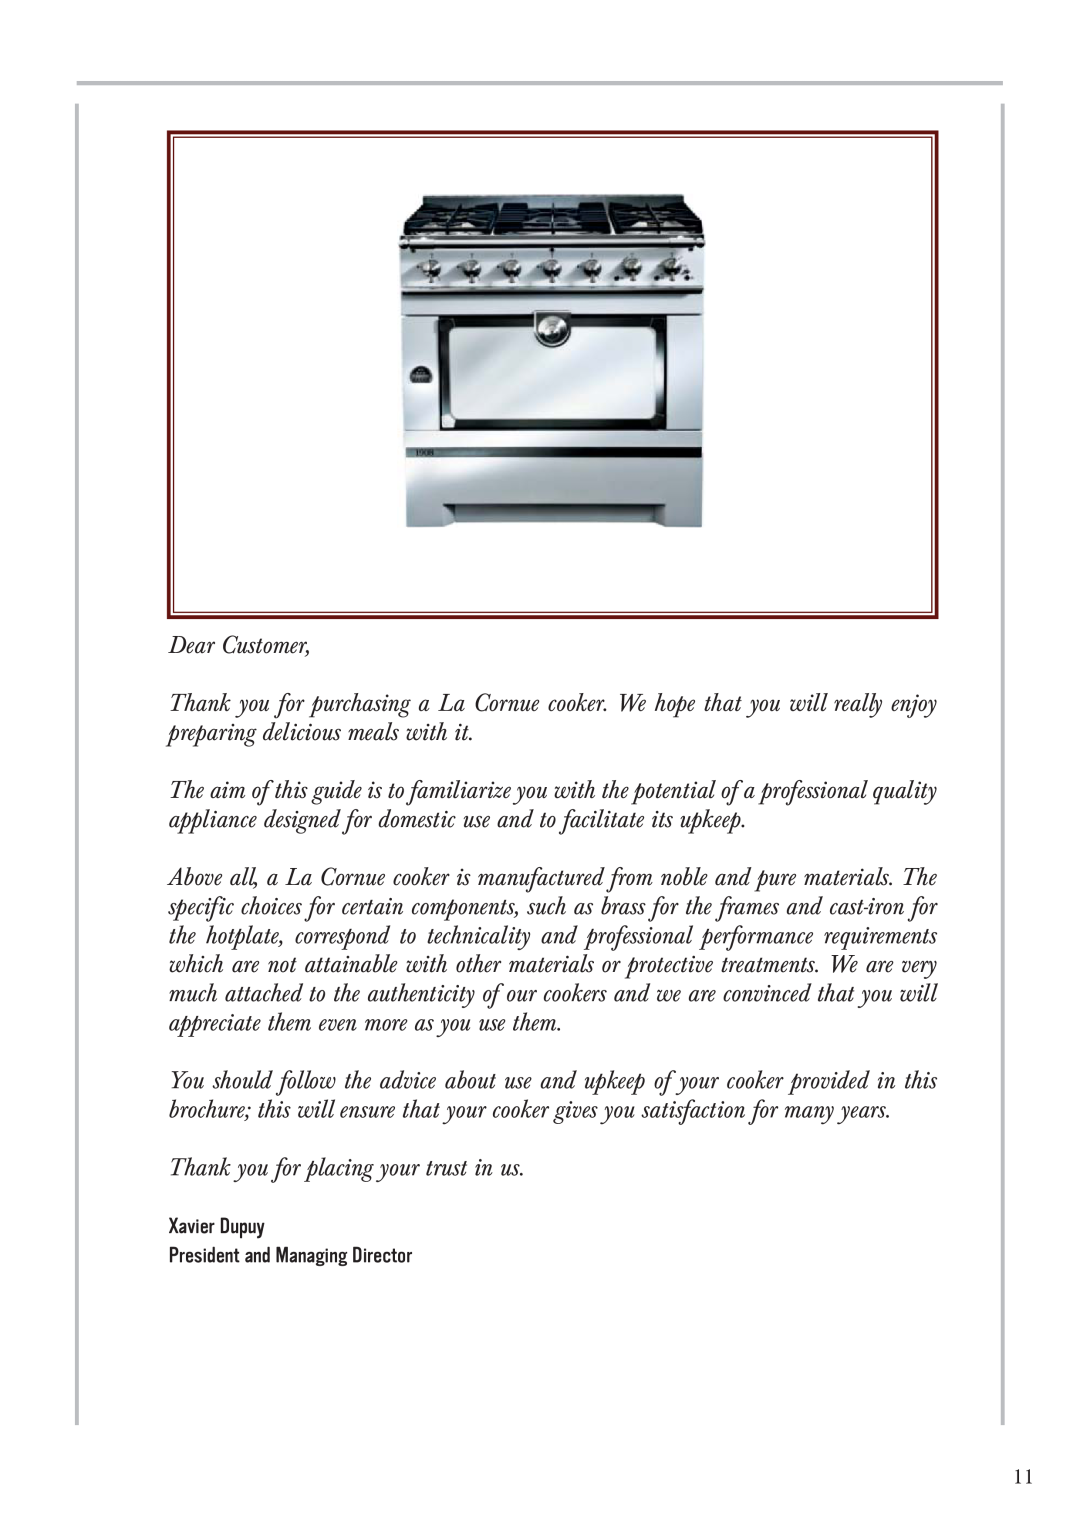 GE 1908 - 36 manual Dear Customer, Thank you for placing your trust in us, Xavier Dupuy President and Managing Director 